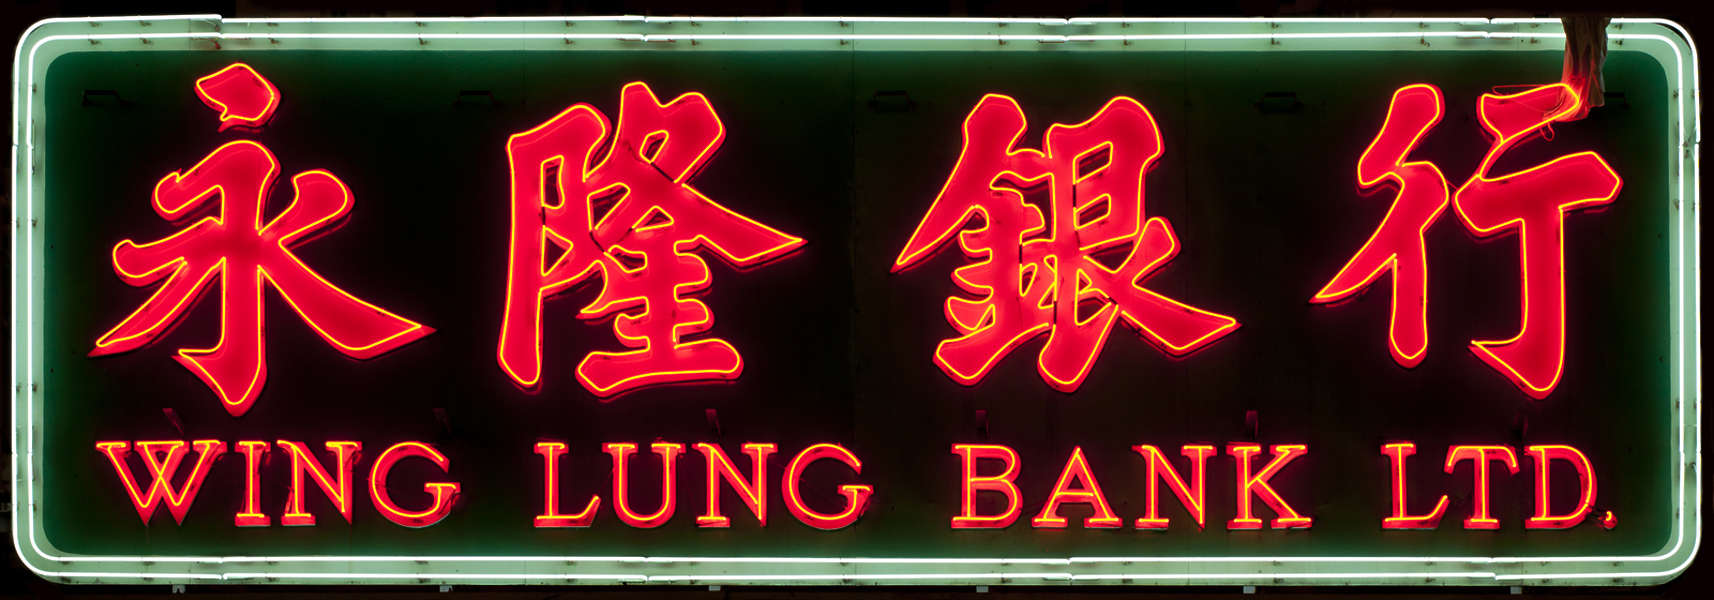 SignsNeon0151 - Free Background Texture - neon sign hong kong chinese